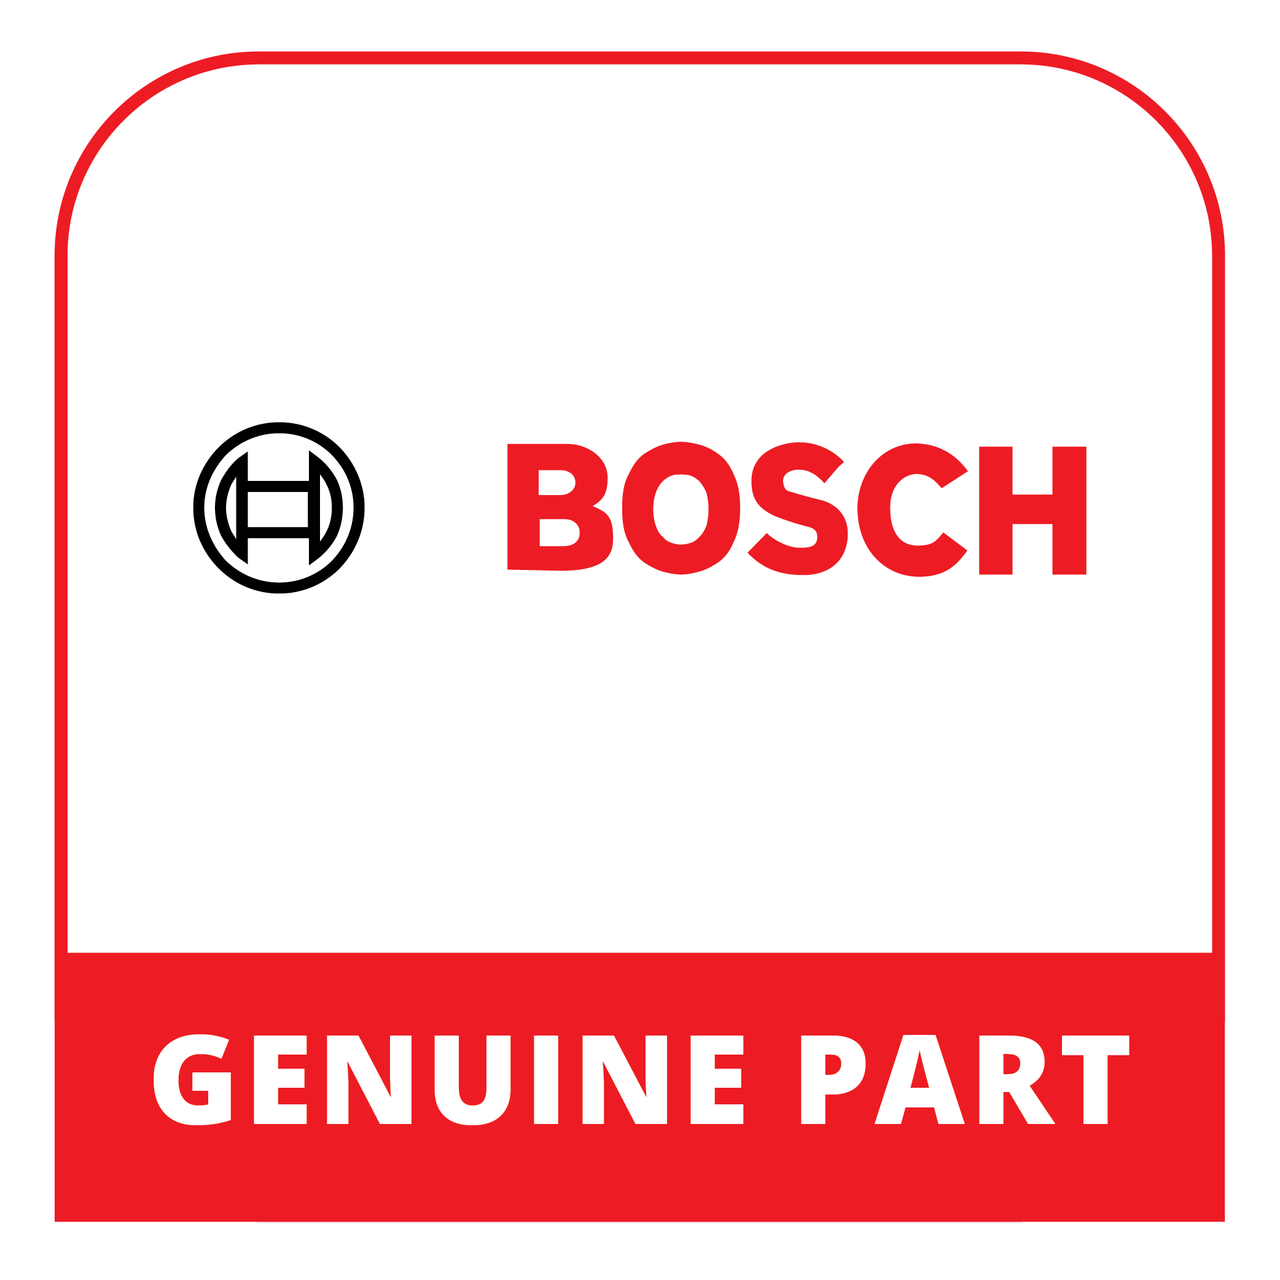 Bosch (Thermador) 10009815 - Connection Piece - Genuine Bosch (Thermador) Part